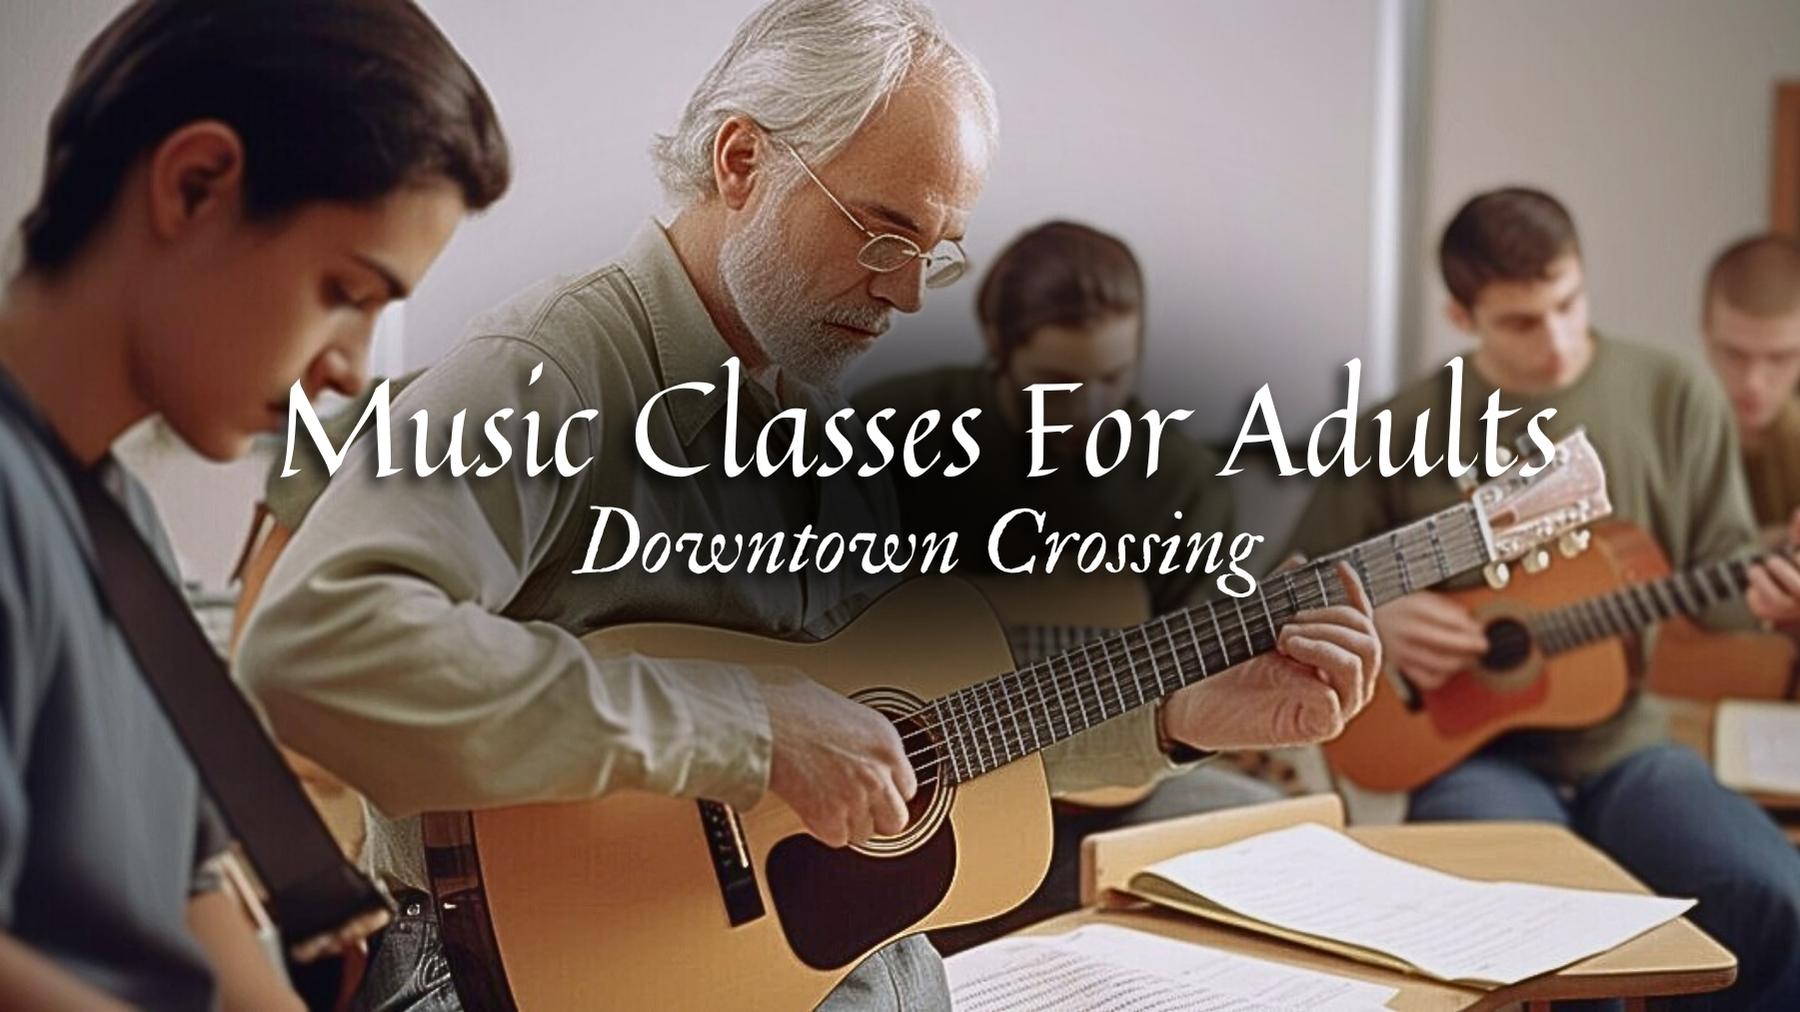 Music Classes for Adults in Downtown Crossing, Massachusetts